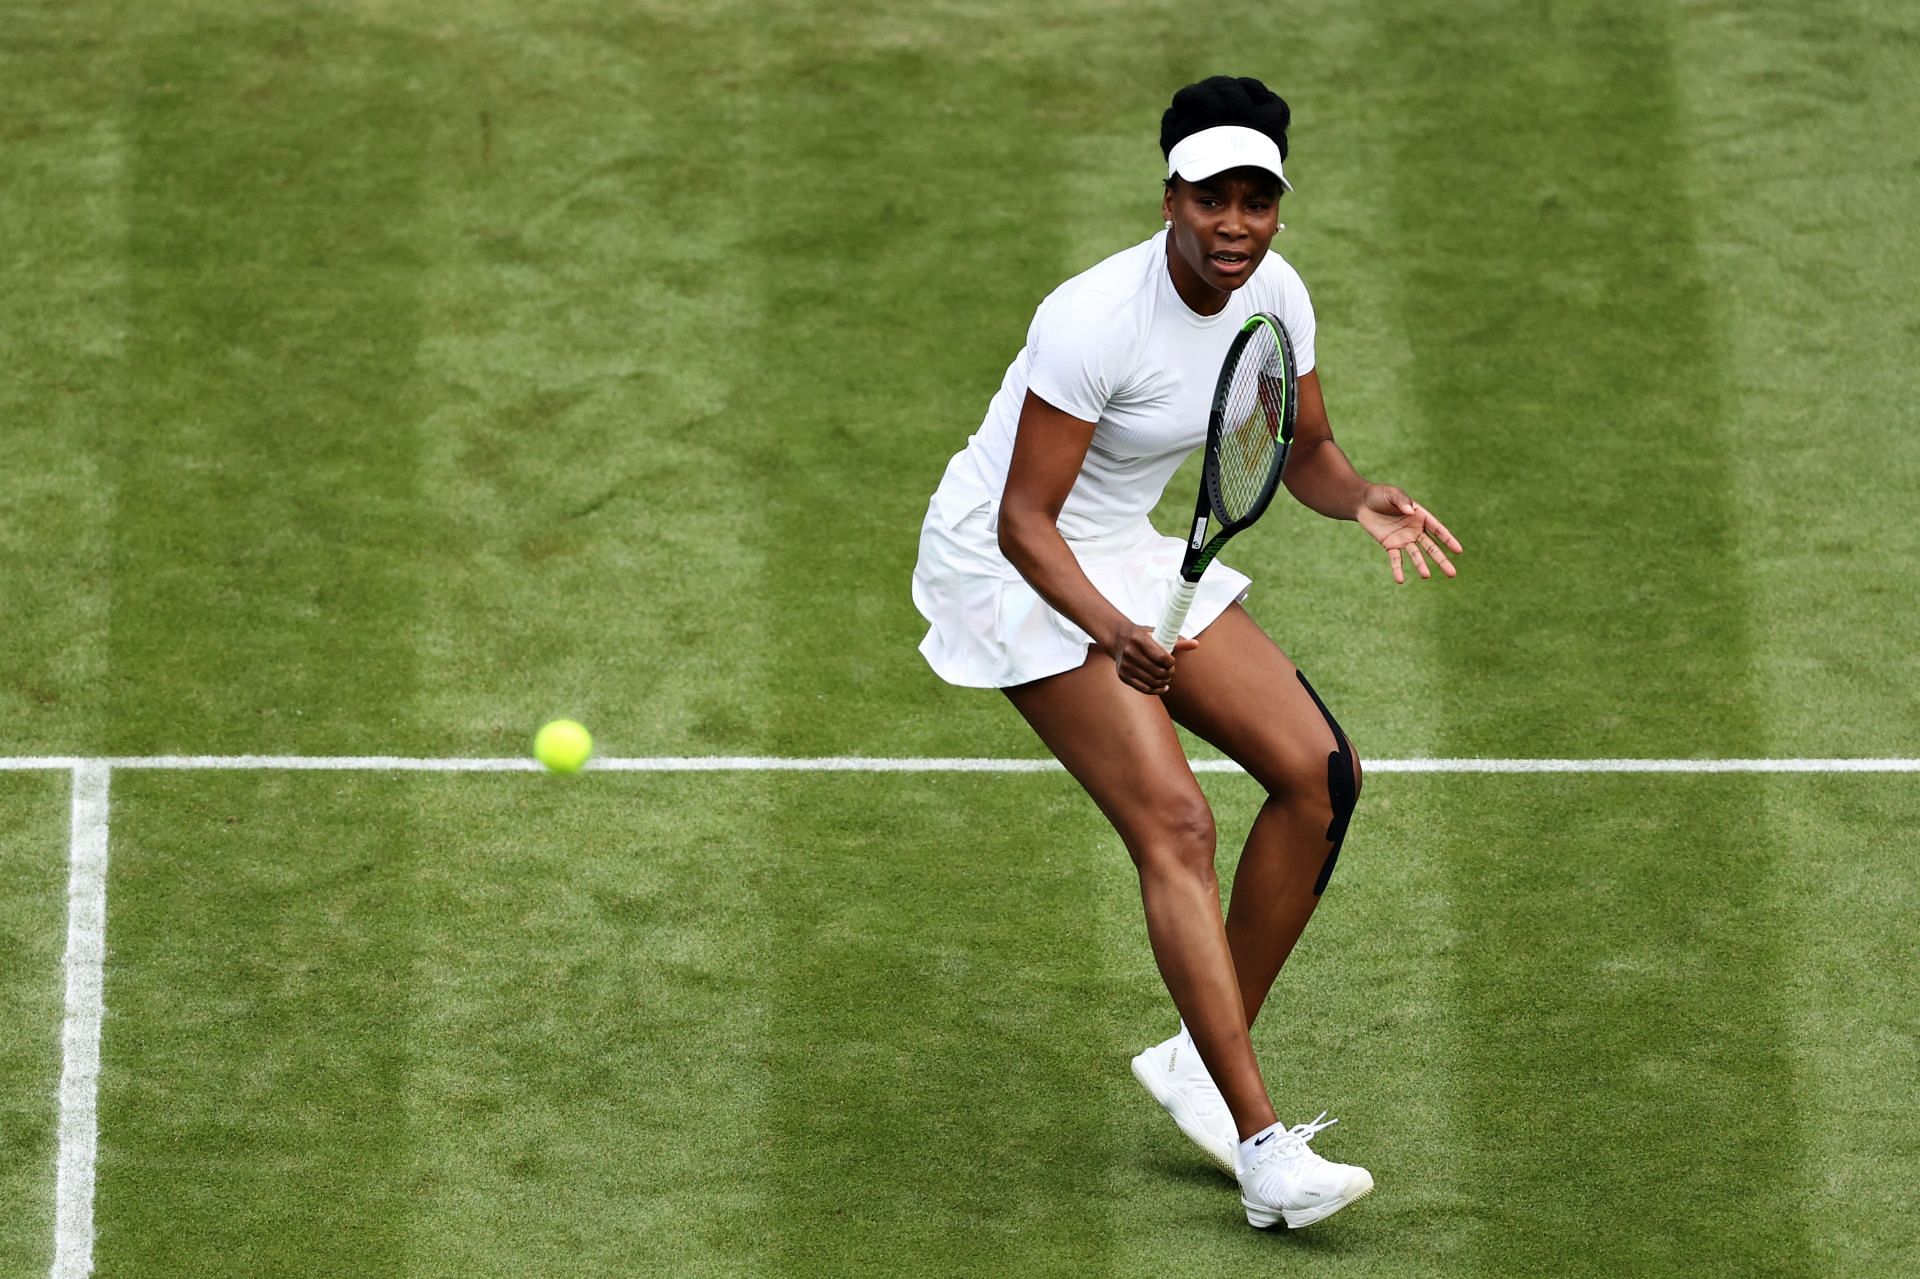 Venus Williams has been out of action since August 2021